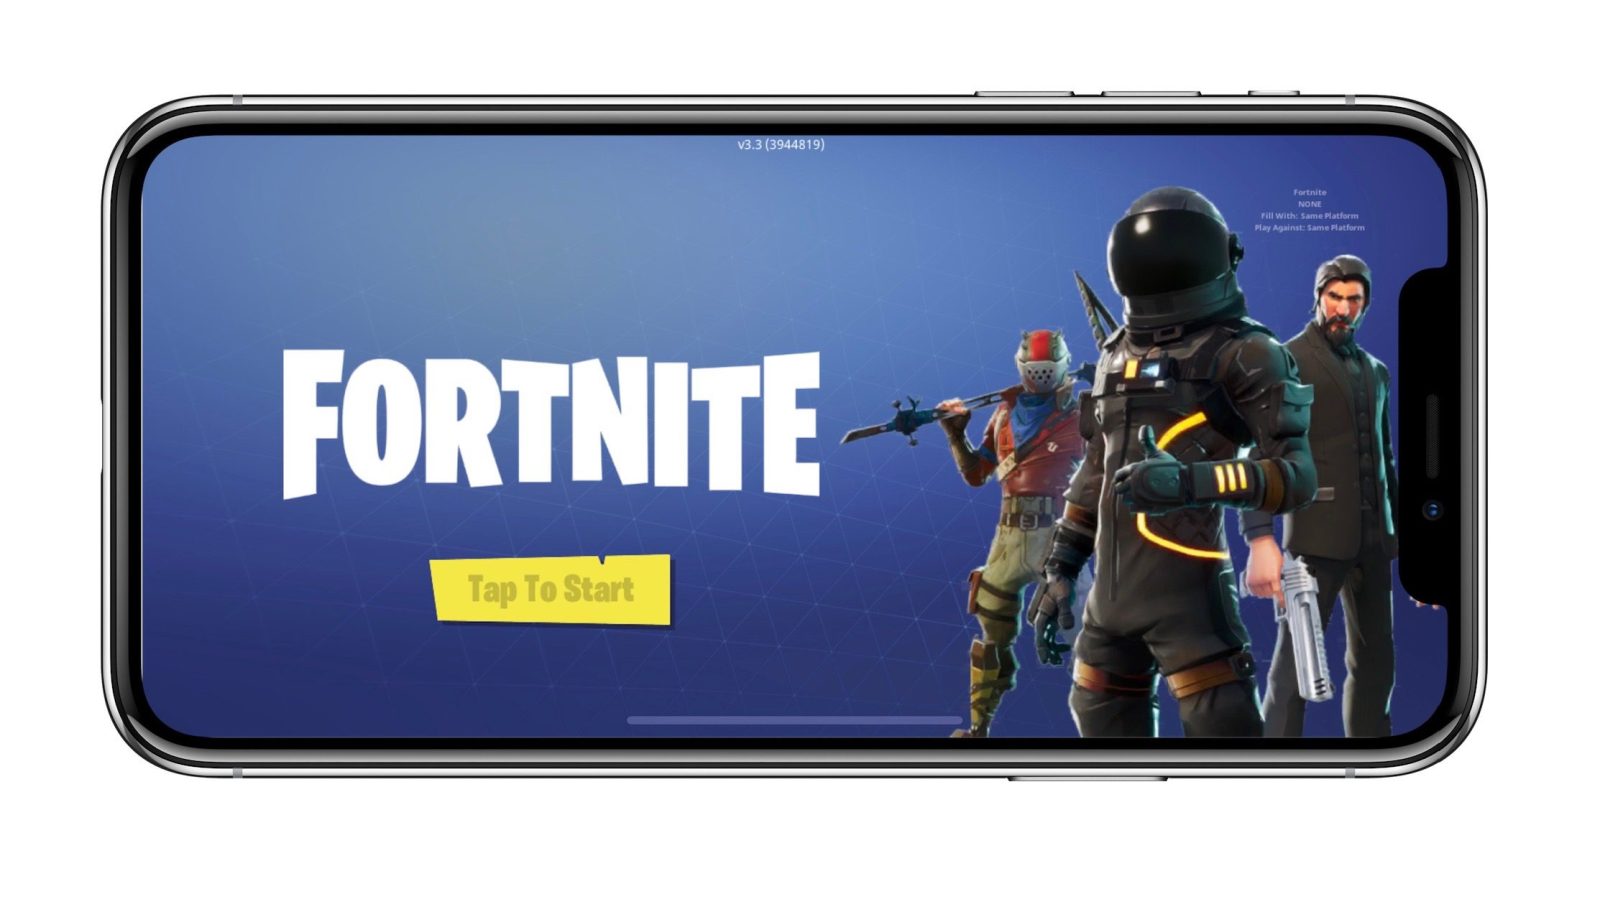 Mobile battle royale games hit $2 billion in revenue as Fortnite faces new competition - 9to5Mac thumbnail